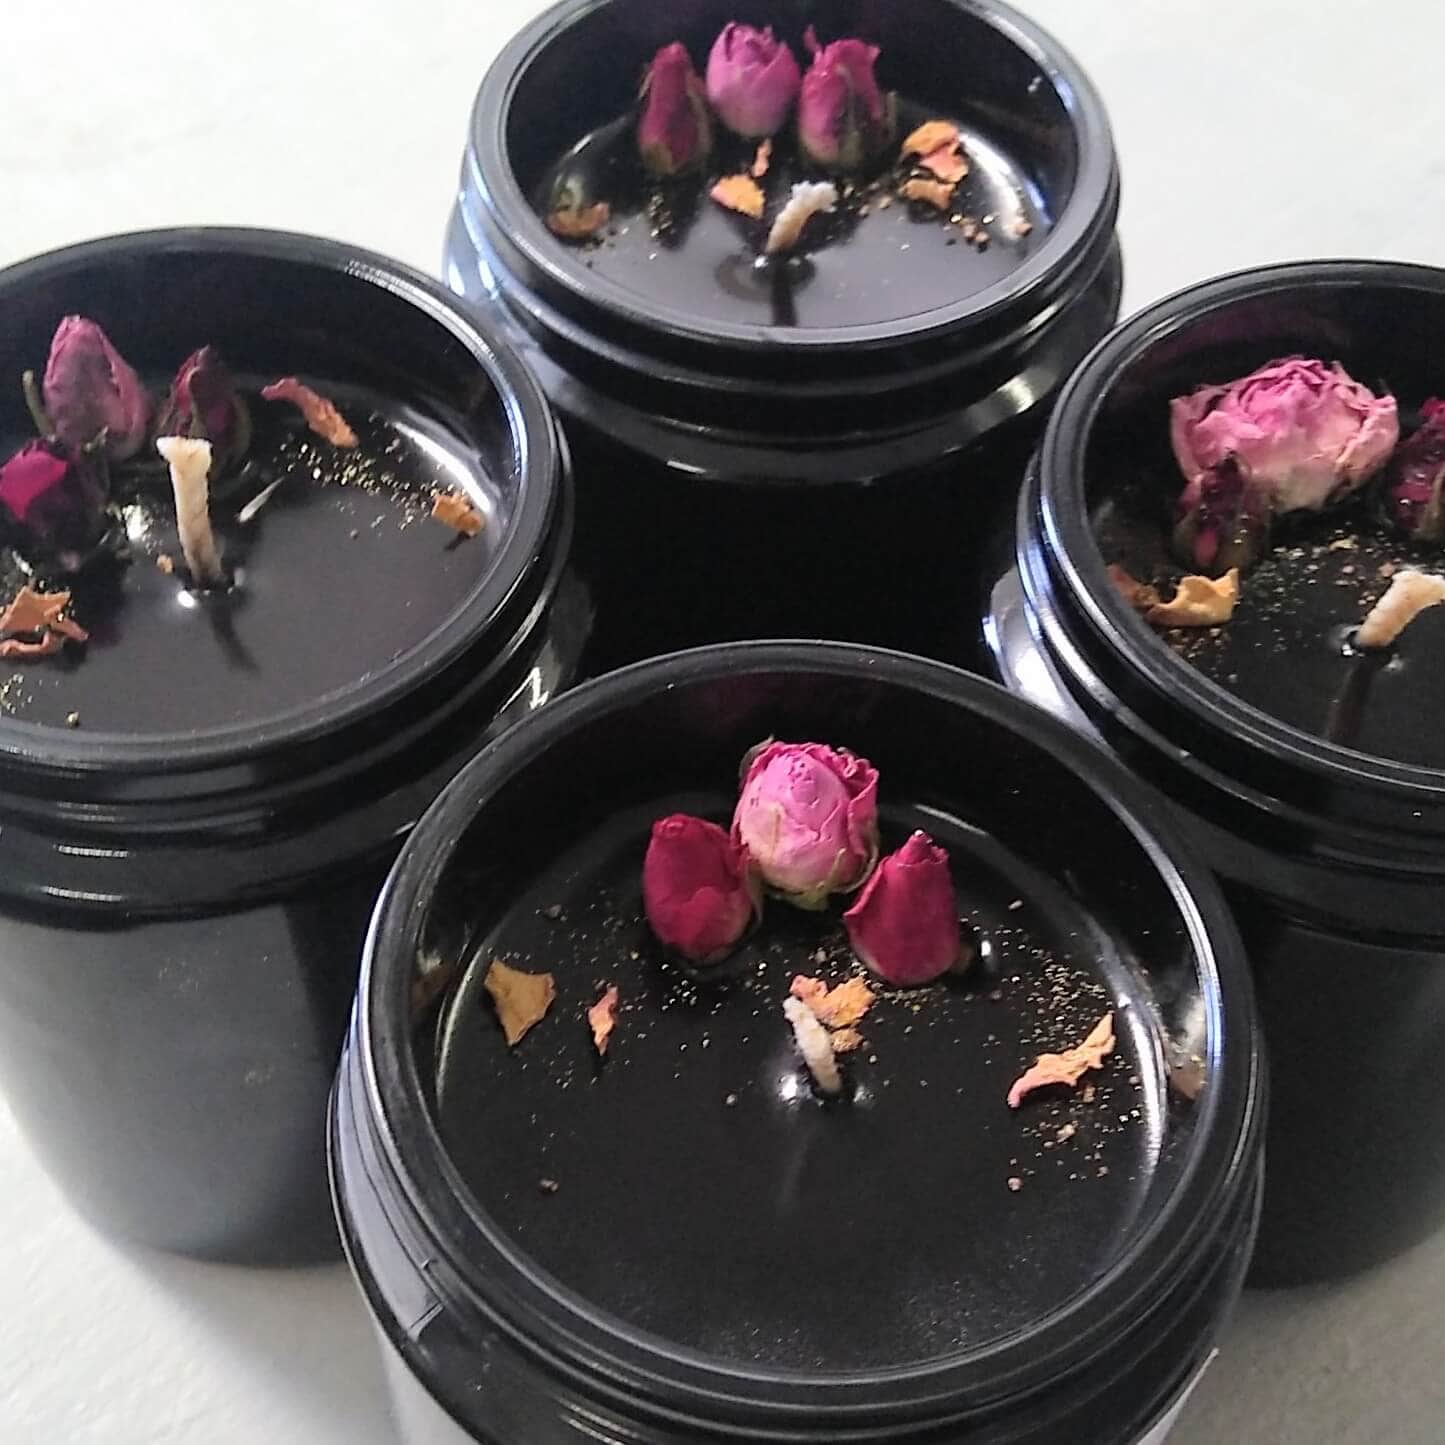 Group Of 4 Love And Gratitude Soy Candles In Black Miron Glass With Rose Buds And Petals